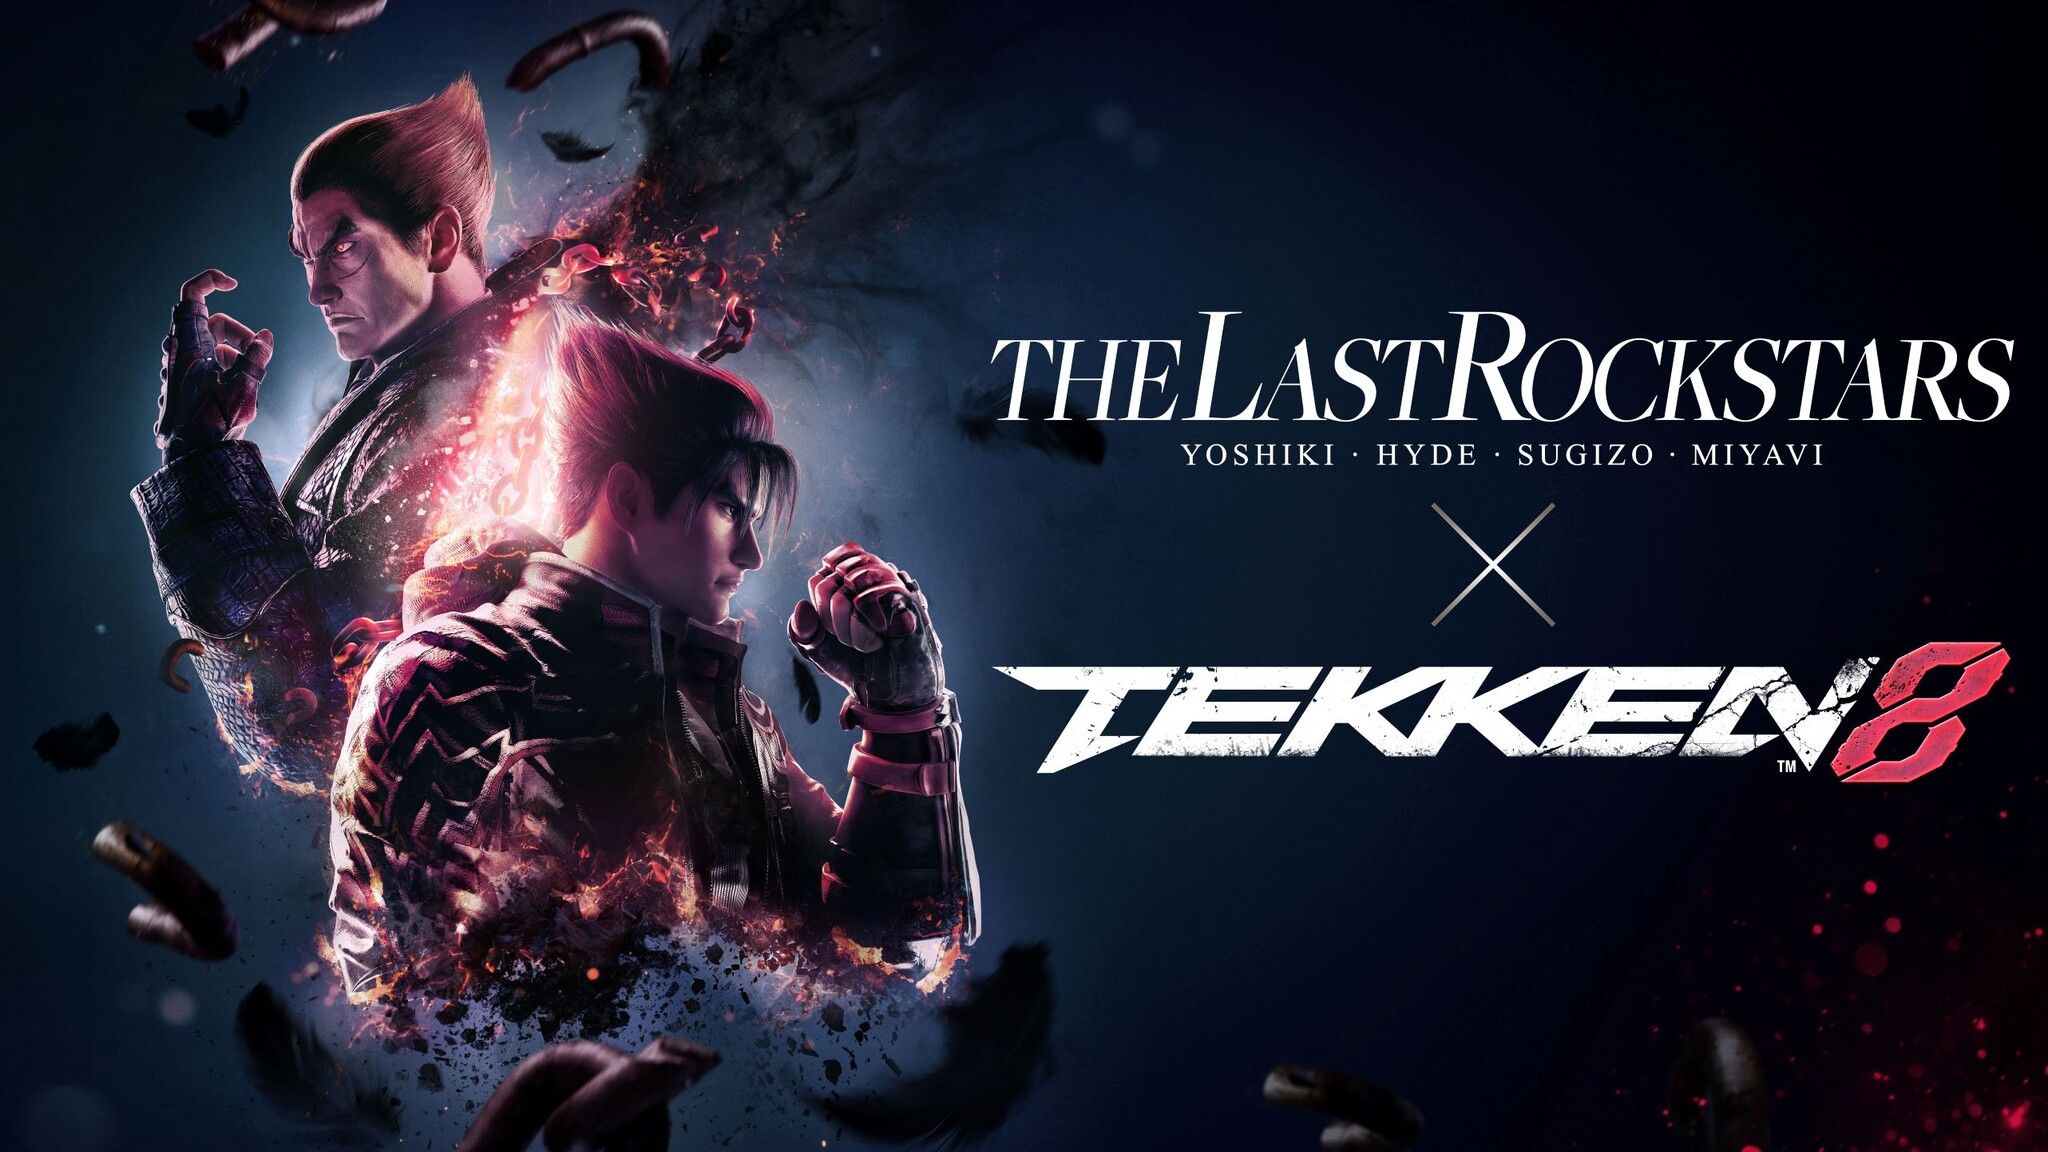 Tekken 8 Collaboration with THE LAST ROCKSTARS: Official Image Song and Release Details